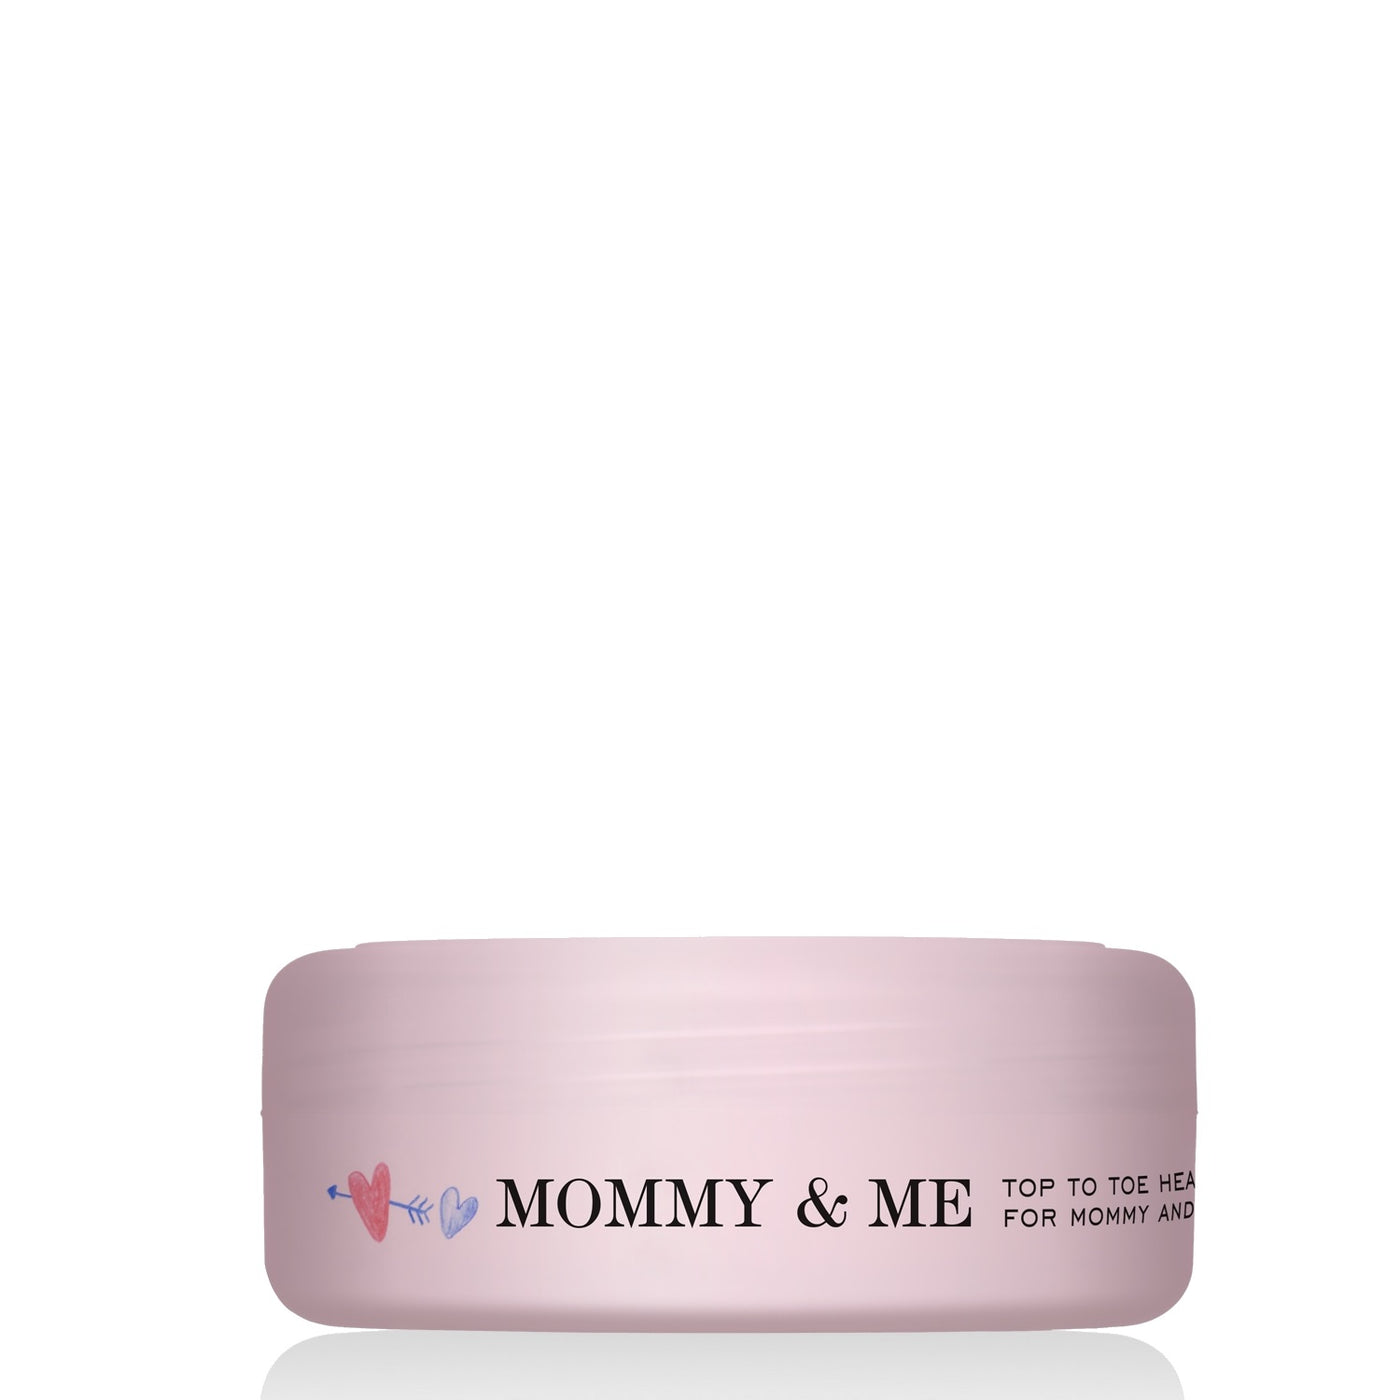 Rudolph Care, Mommy and Me balm travelsize 45 ml.